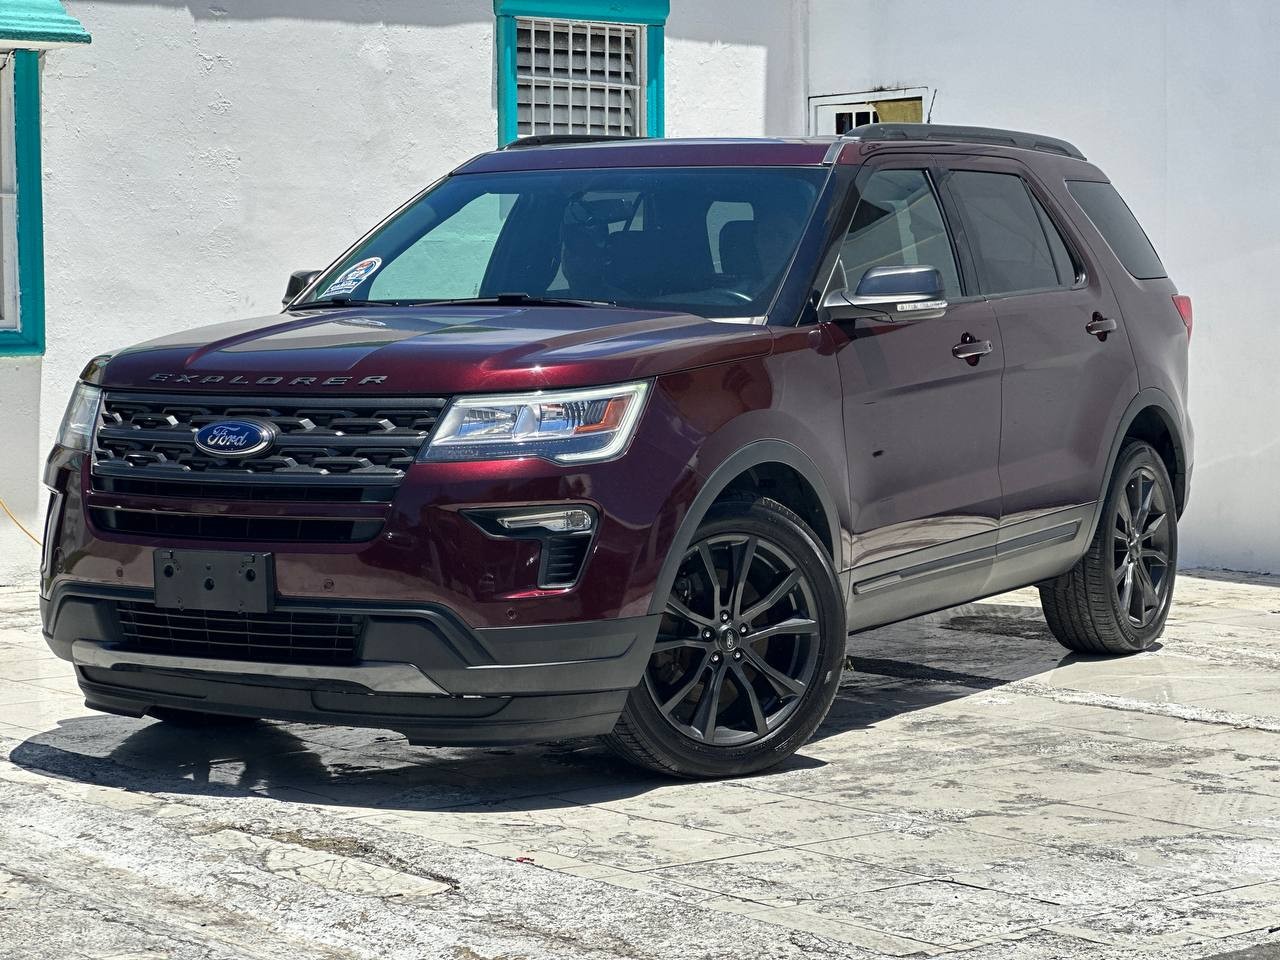 jeepetas y camionetas - FORD EXPLORER PANORAMICA 4x4 2018CLEAN CARFAX 2